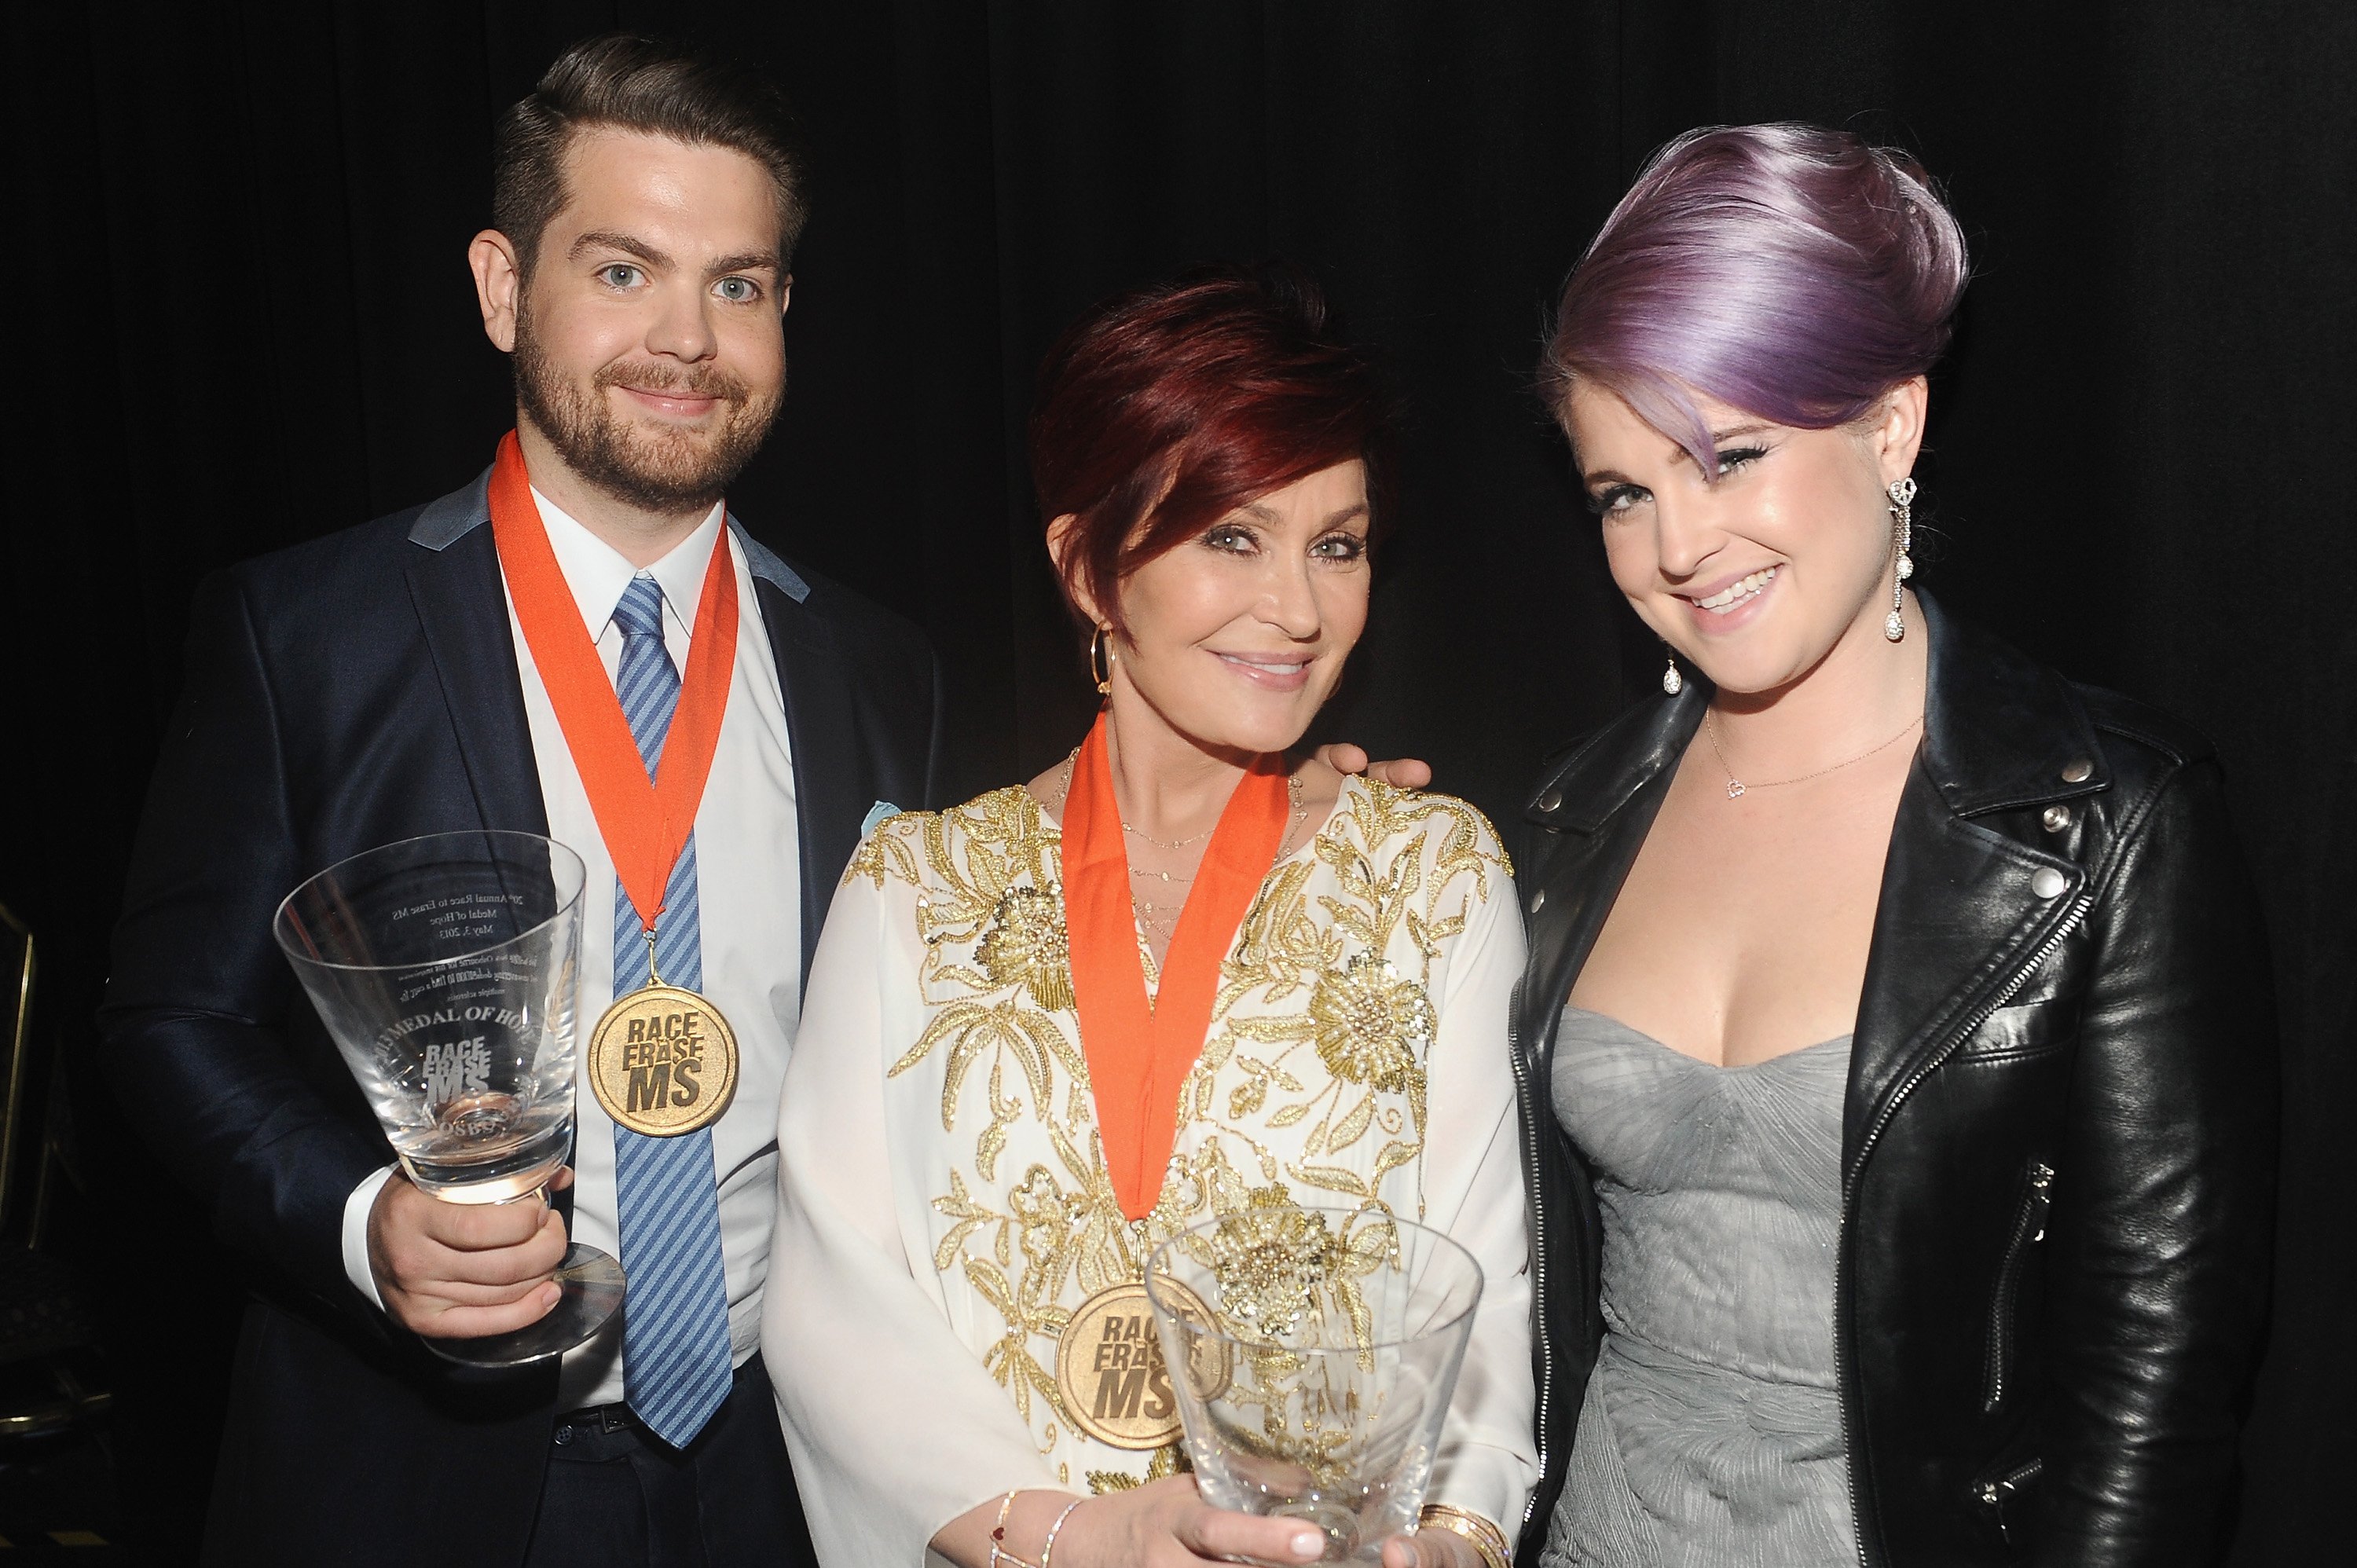 Sharon with Kelly and Jack at  20th Annual Race To Erase MS Gala "Love To Erase MS" in California, 2013. | Photo: Getty Images 